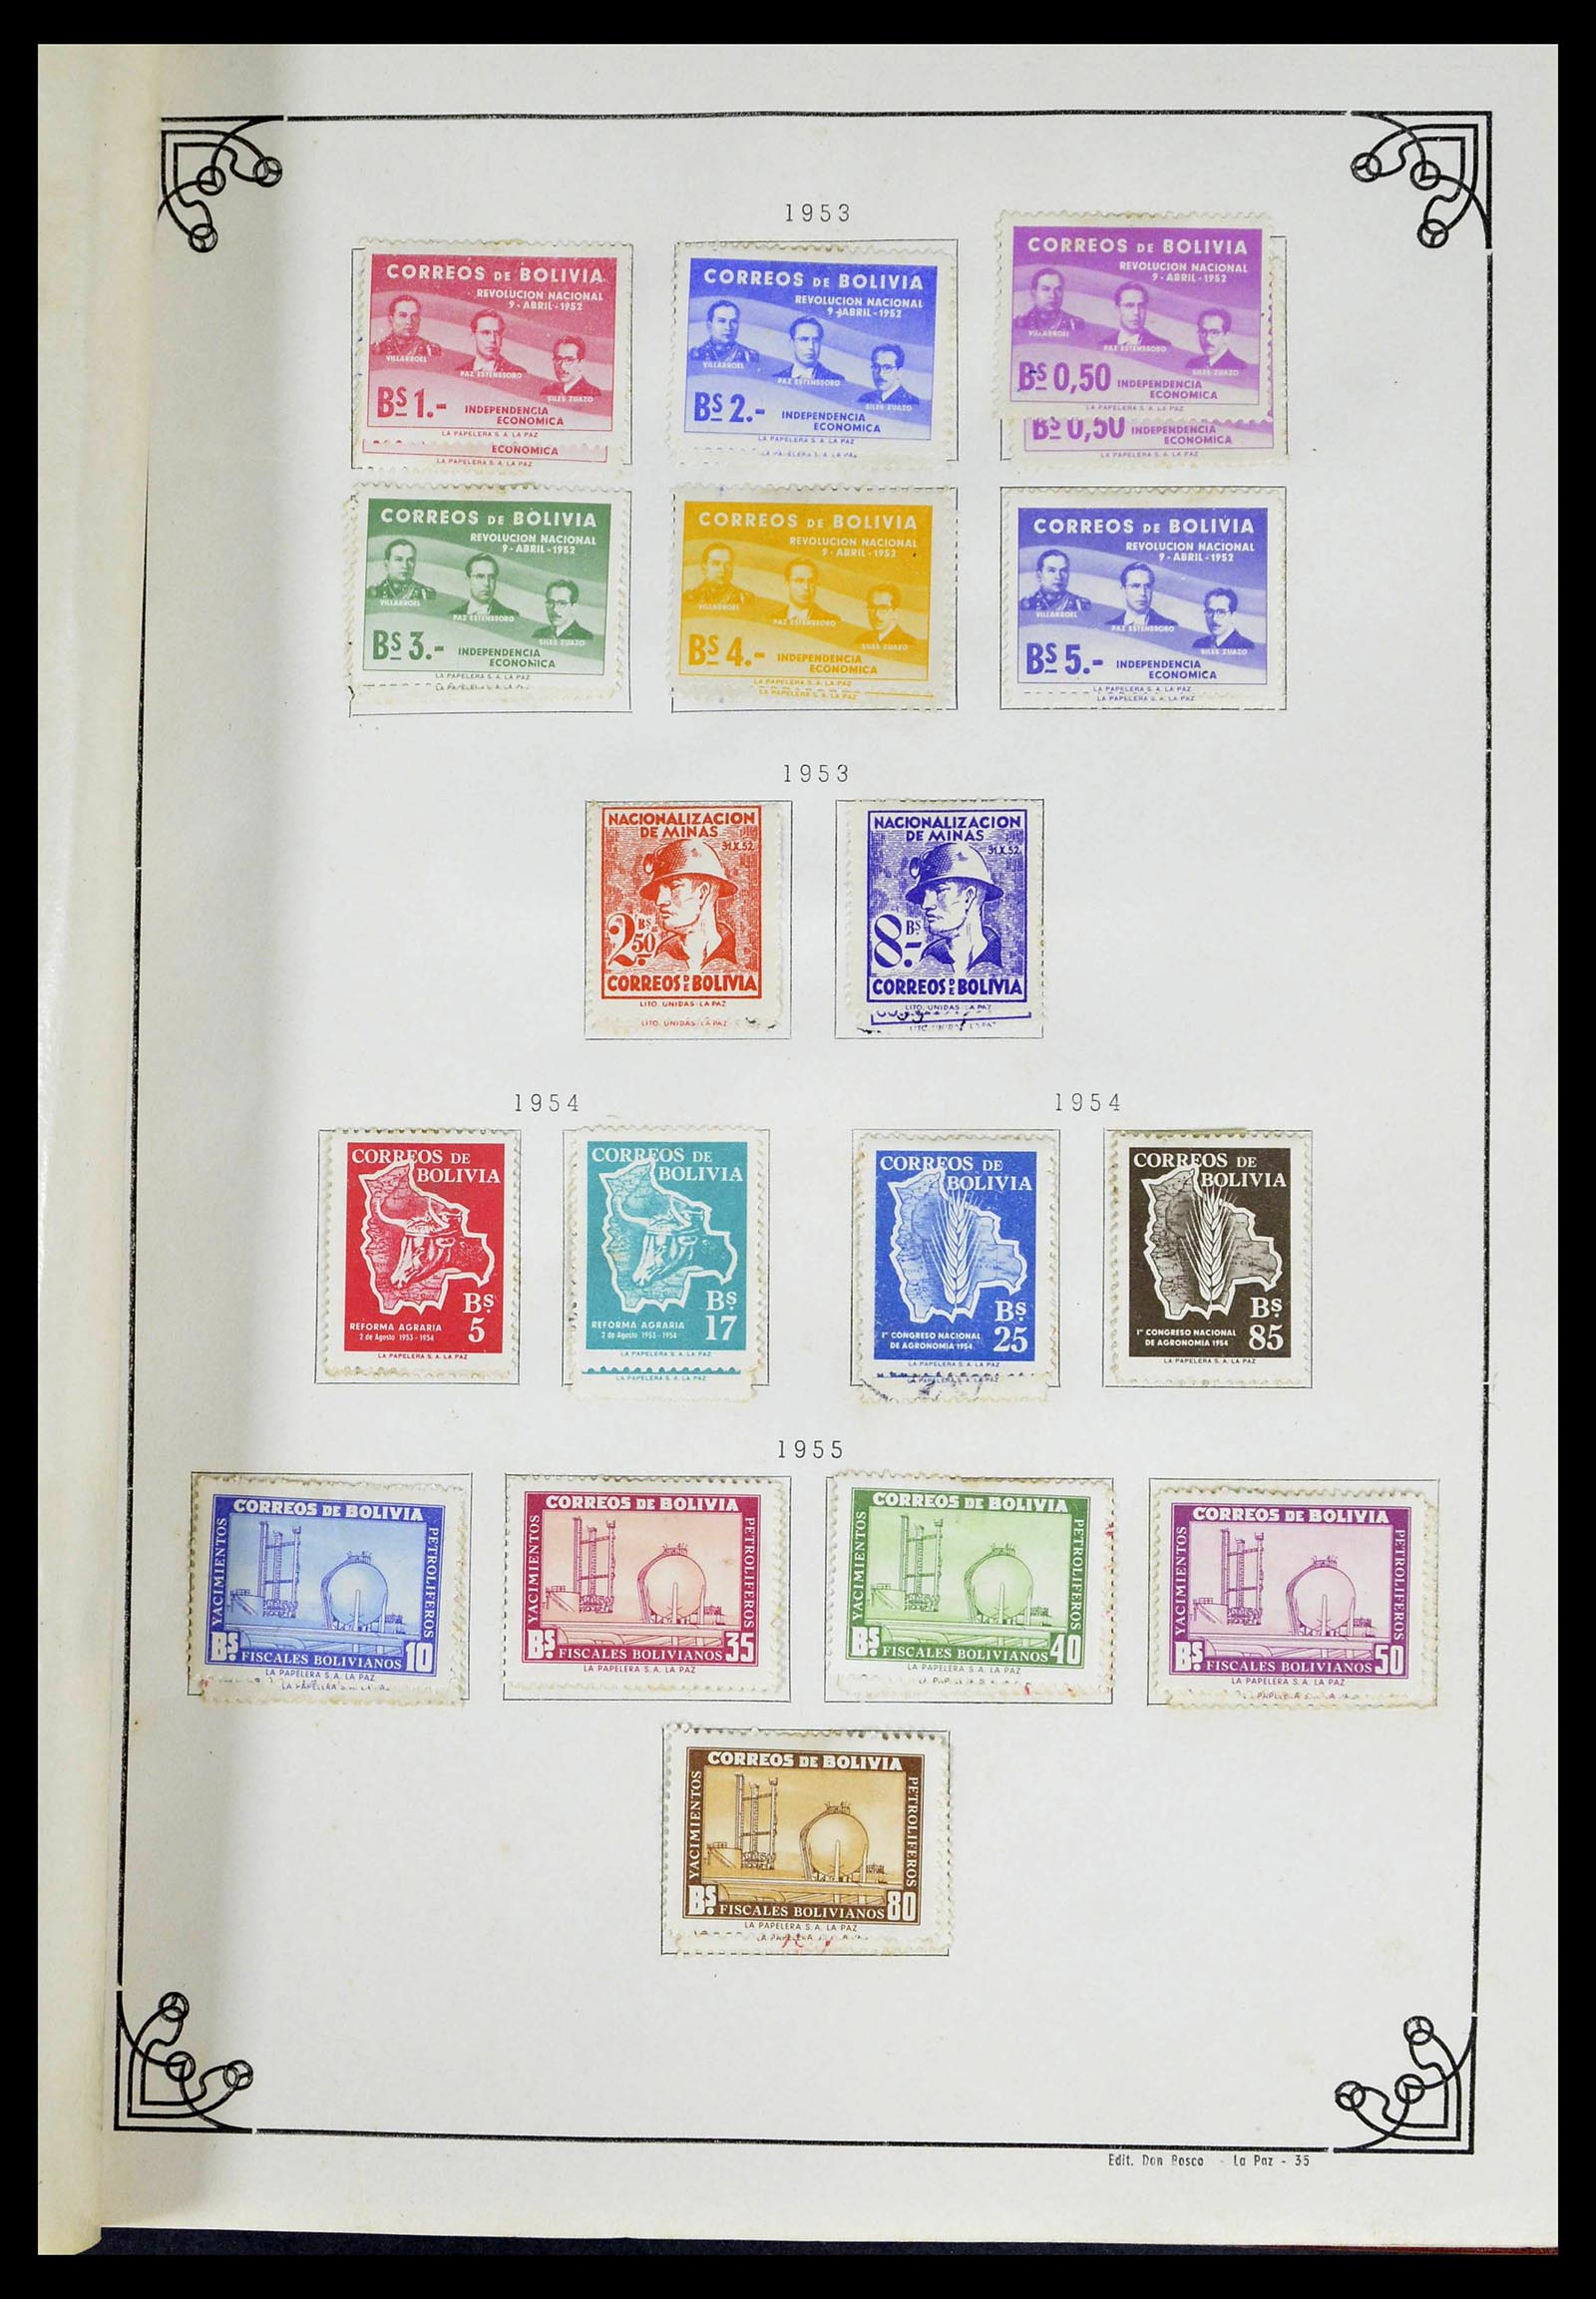 39224 0038 - Stamp collection 39224 Bolivia 1849-1955.